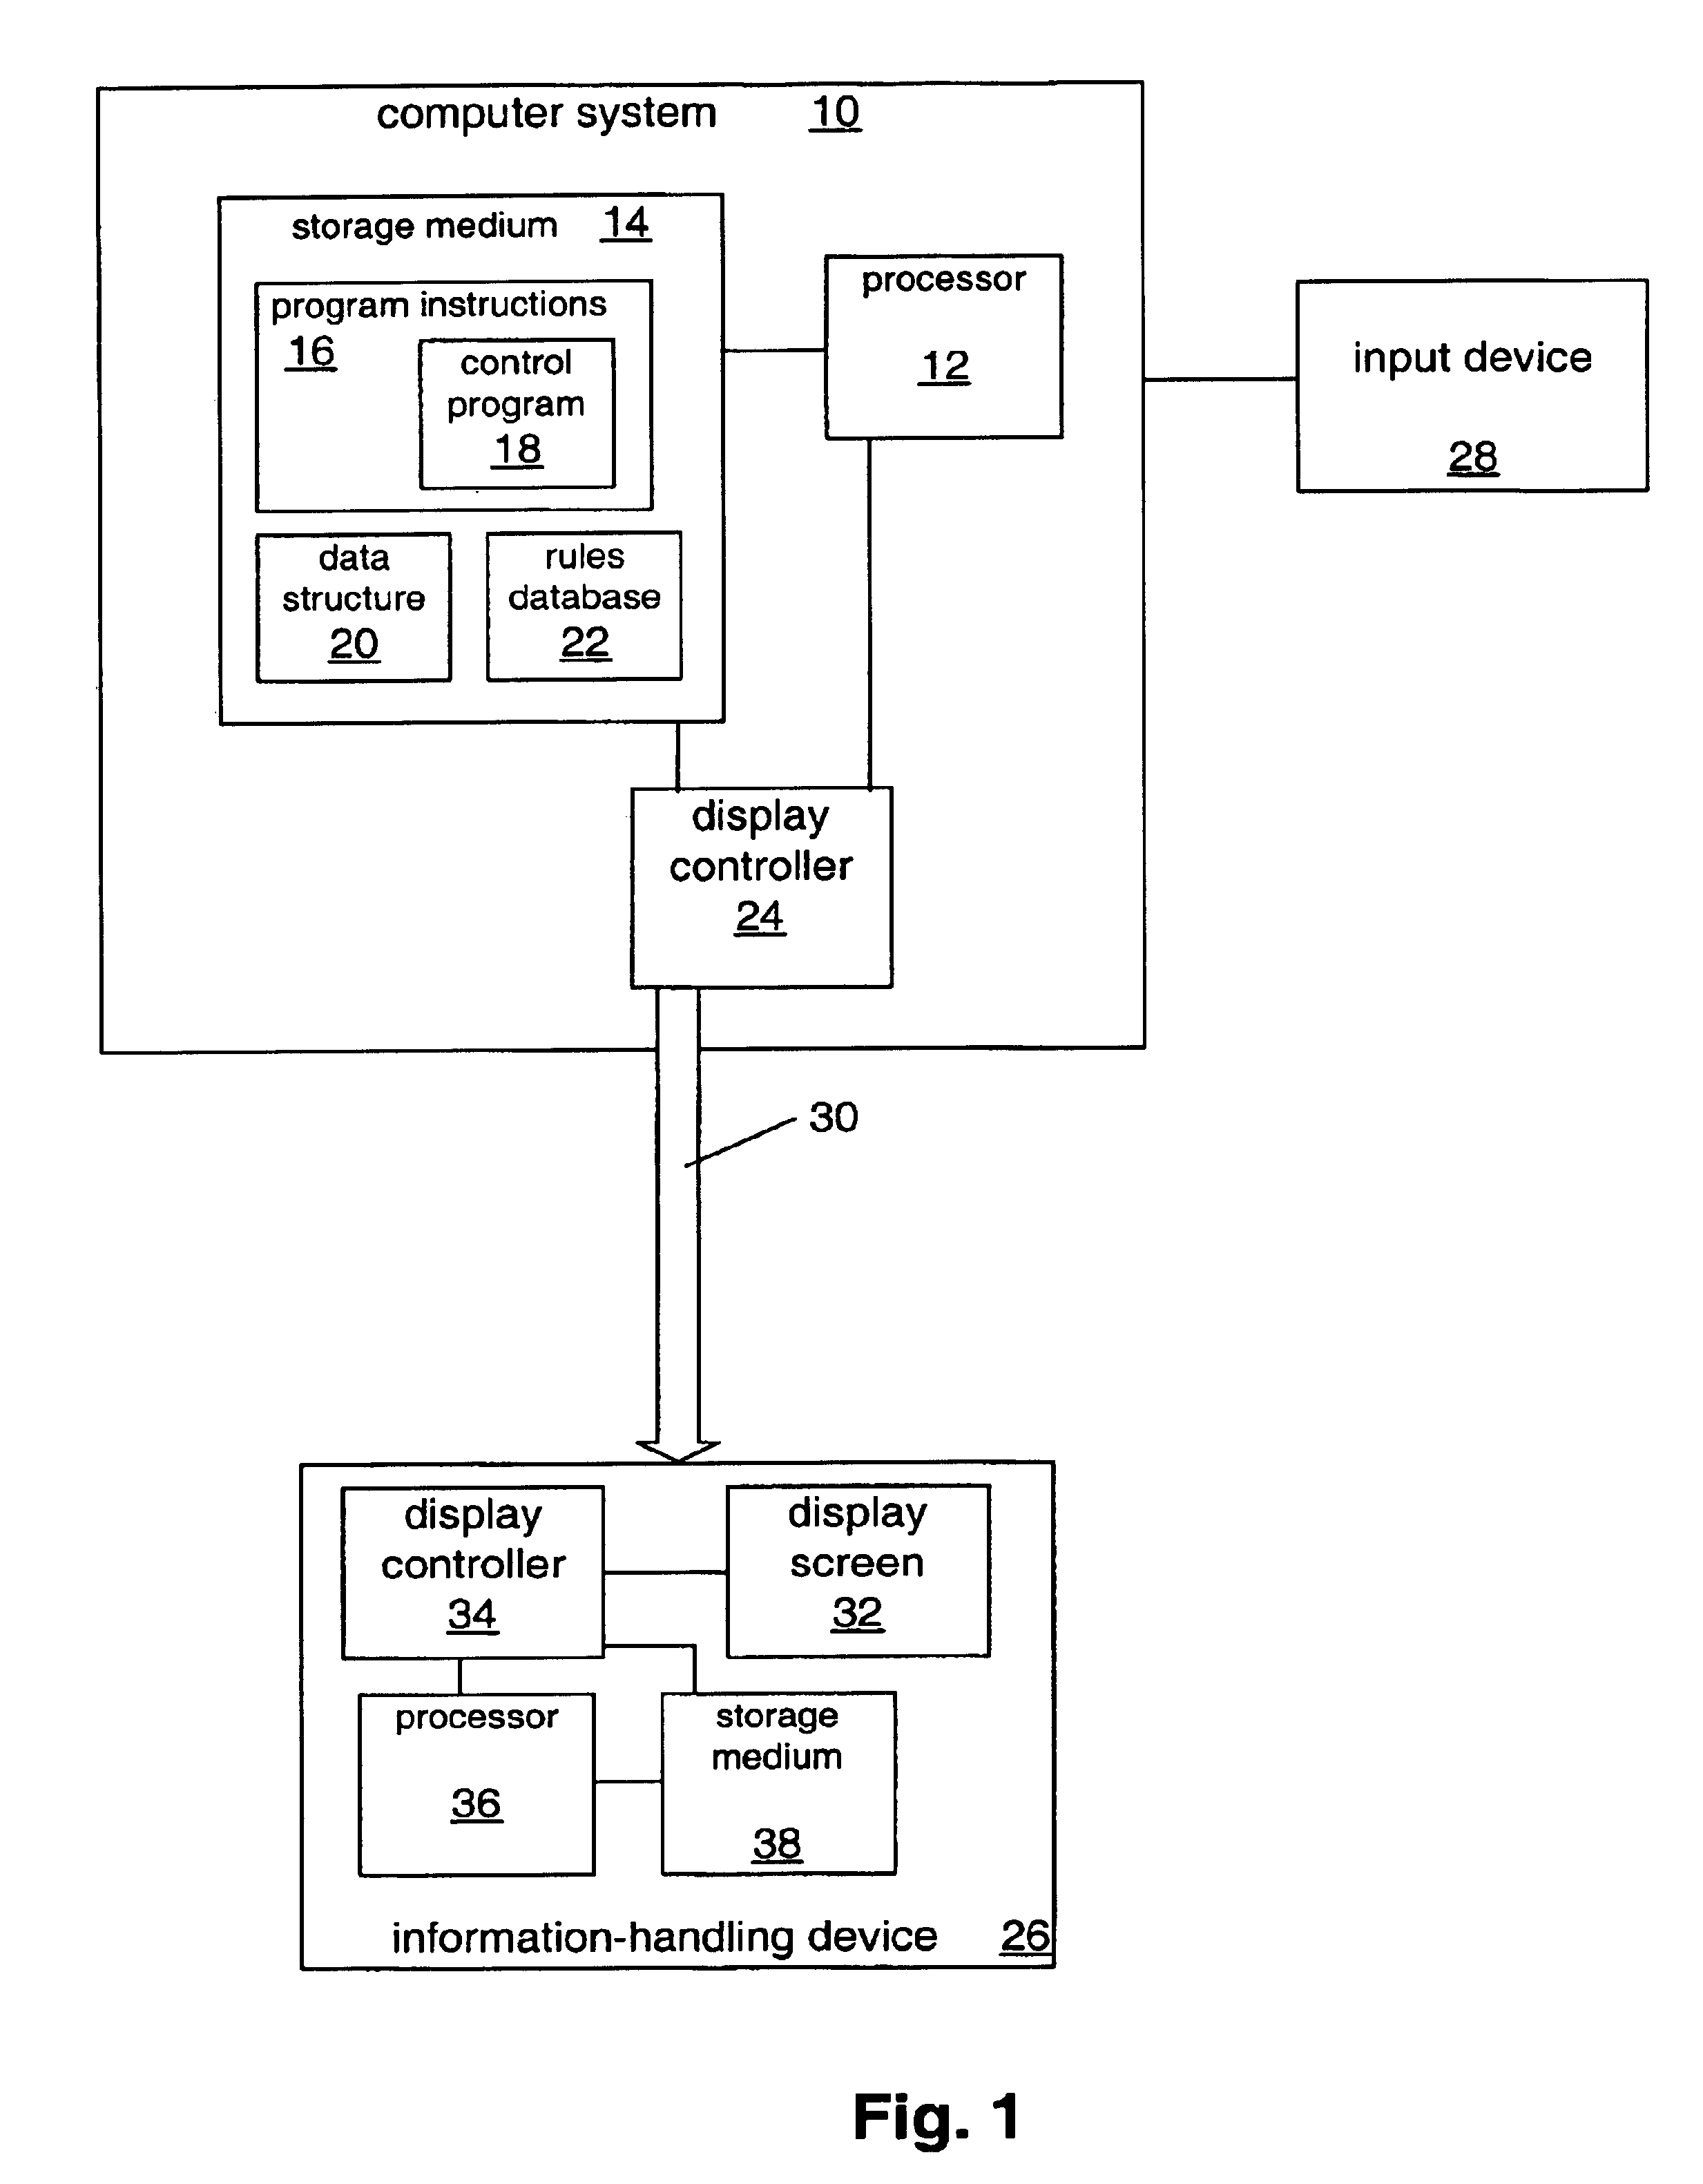 Arrangement of information into linear form for display on diverse display devices